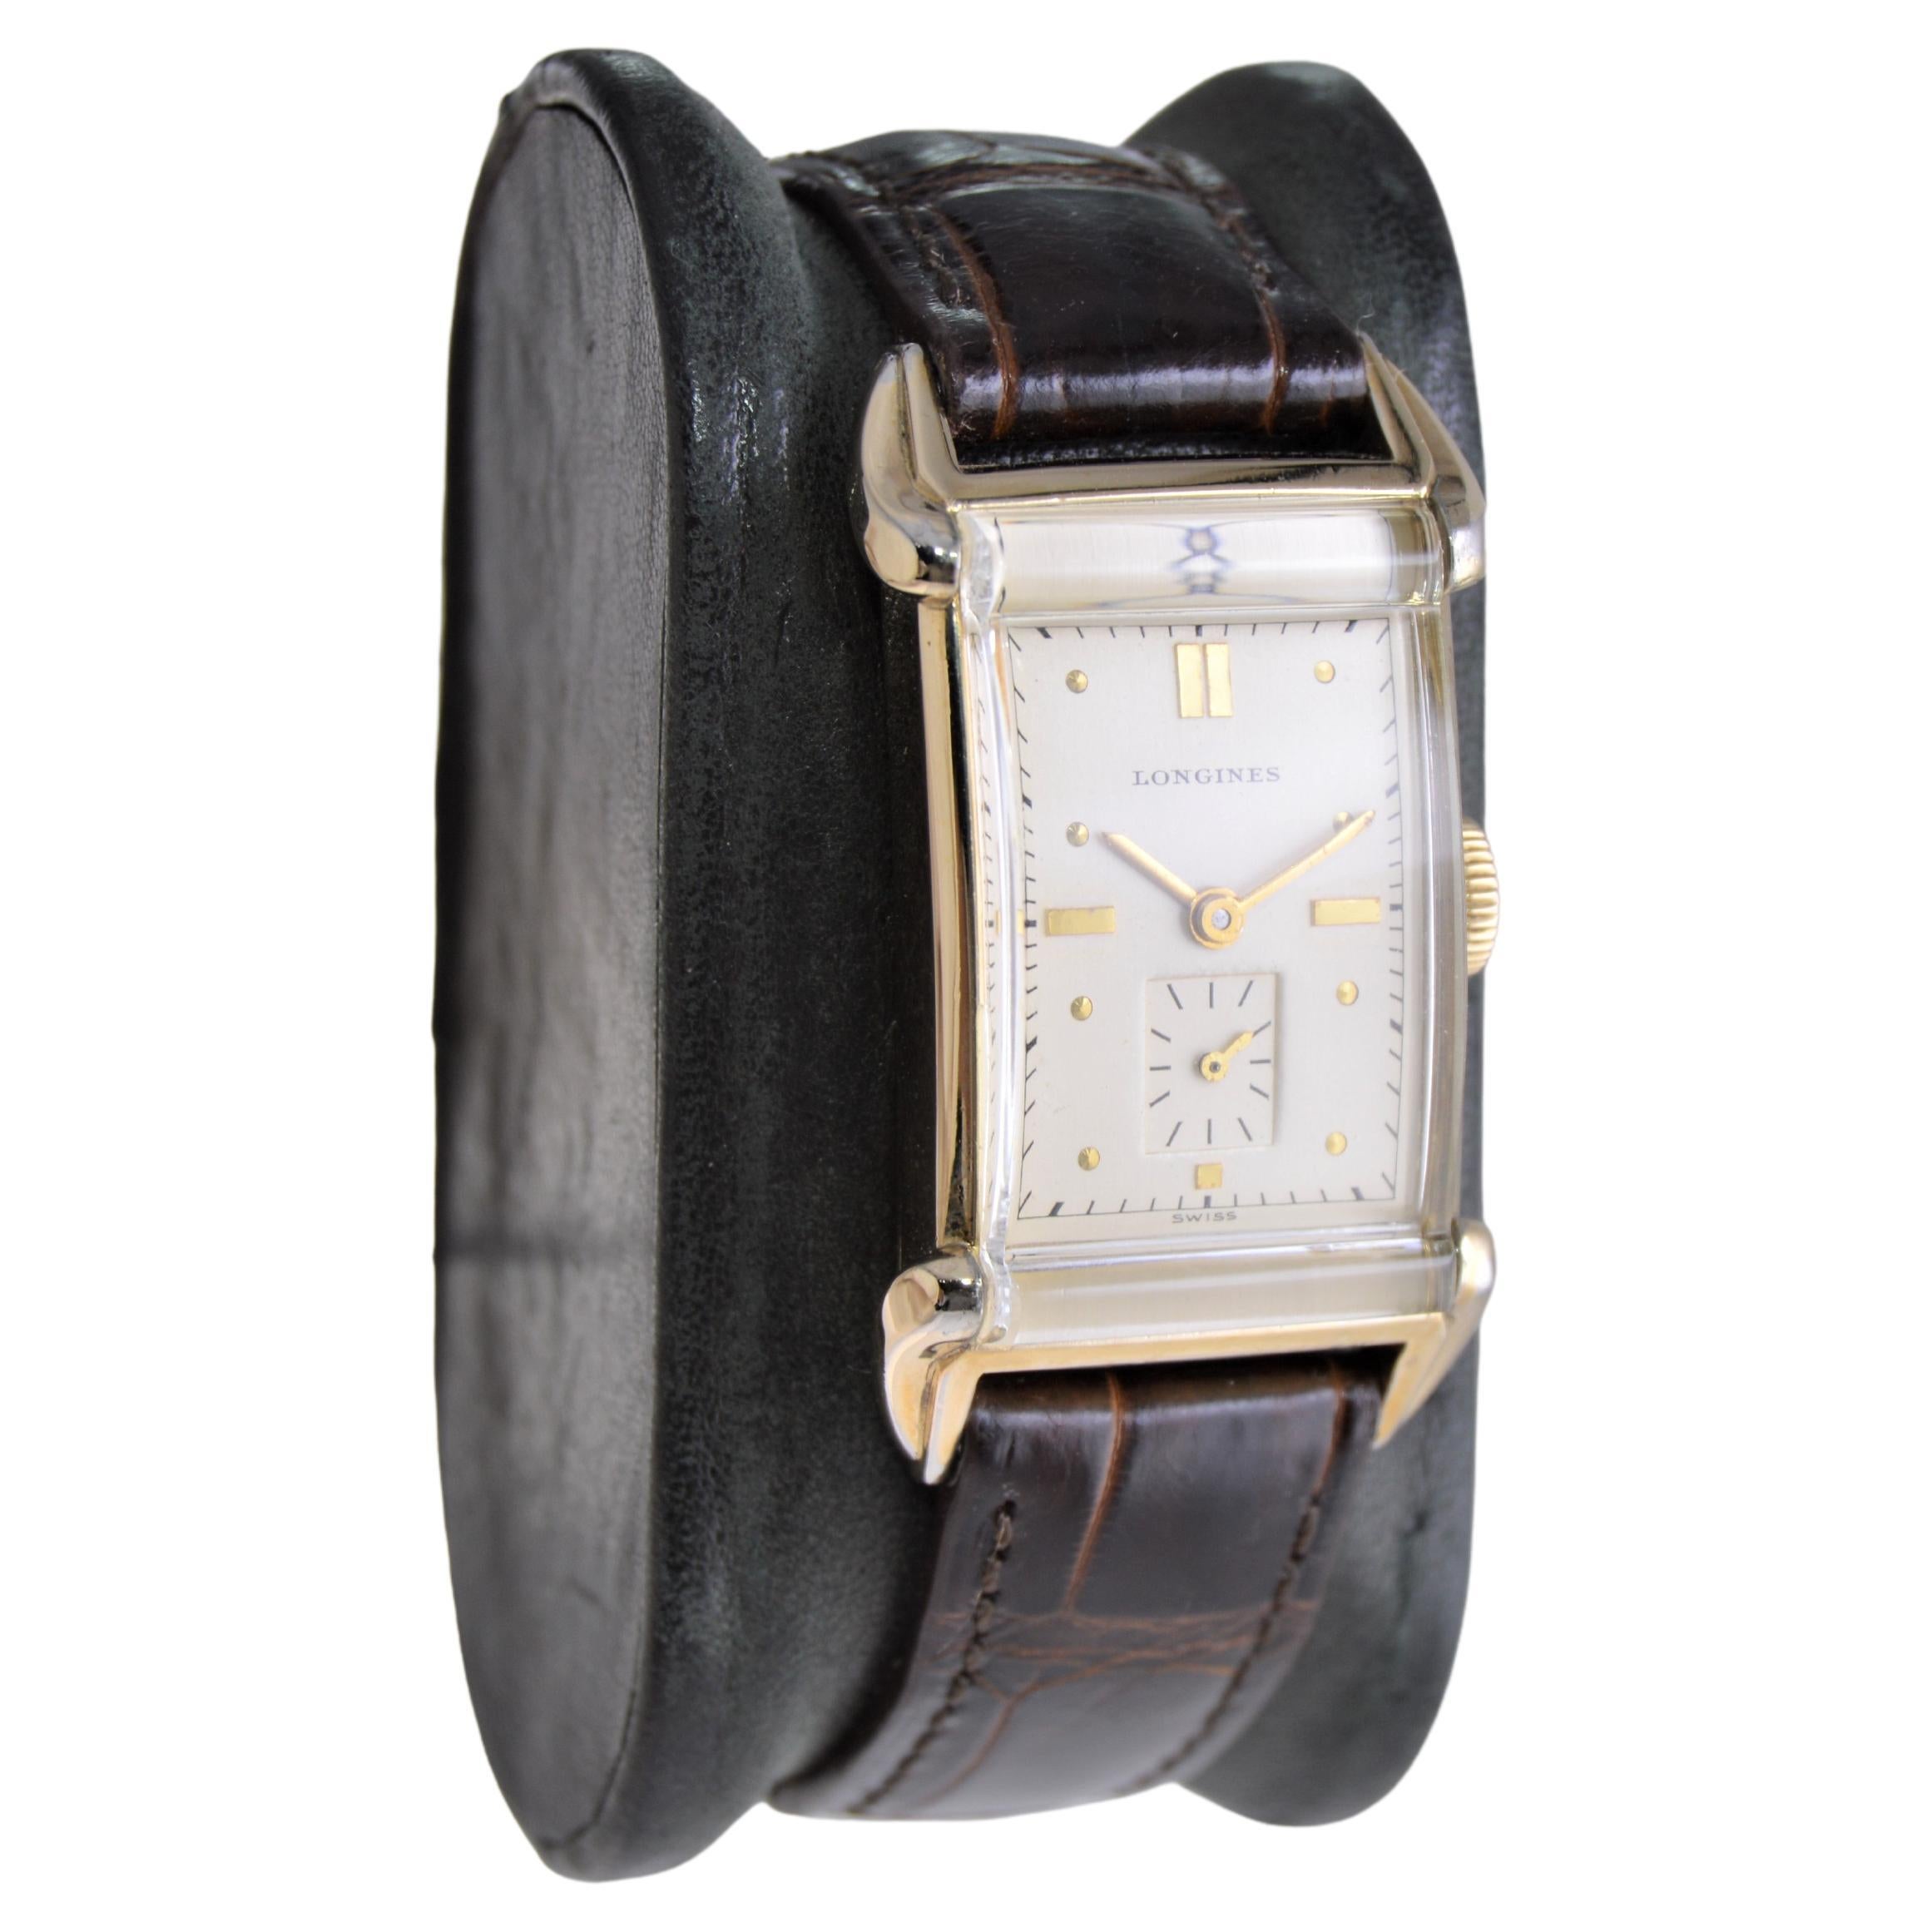 FACTORY / HOUSE: Longines Watch Company
STYLE / REFERENCE: Art Deco Tank
METAL / MATERIAL: Yellow Gold Filled
CIRCA / YEAR: 1940's
DIMENSIONS / SIZE: Length 41mm x Width 23mm
MOVEMENT / CALIBER: Manual Winding / 17 Jewels / Caliber 9L
DIAL / HANDS: